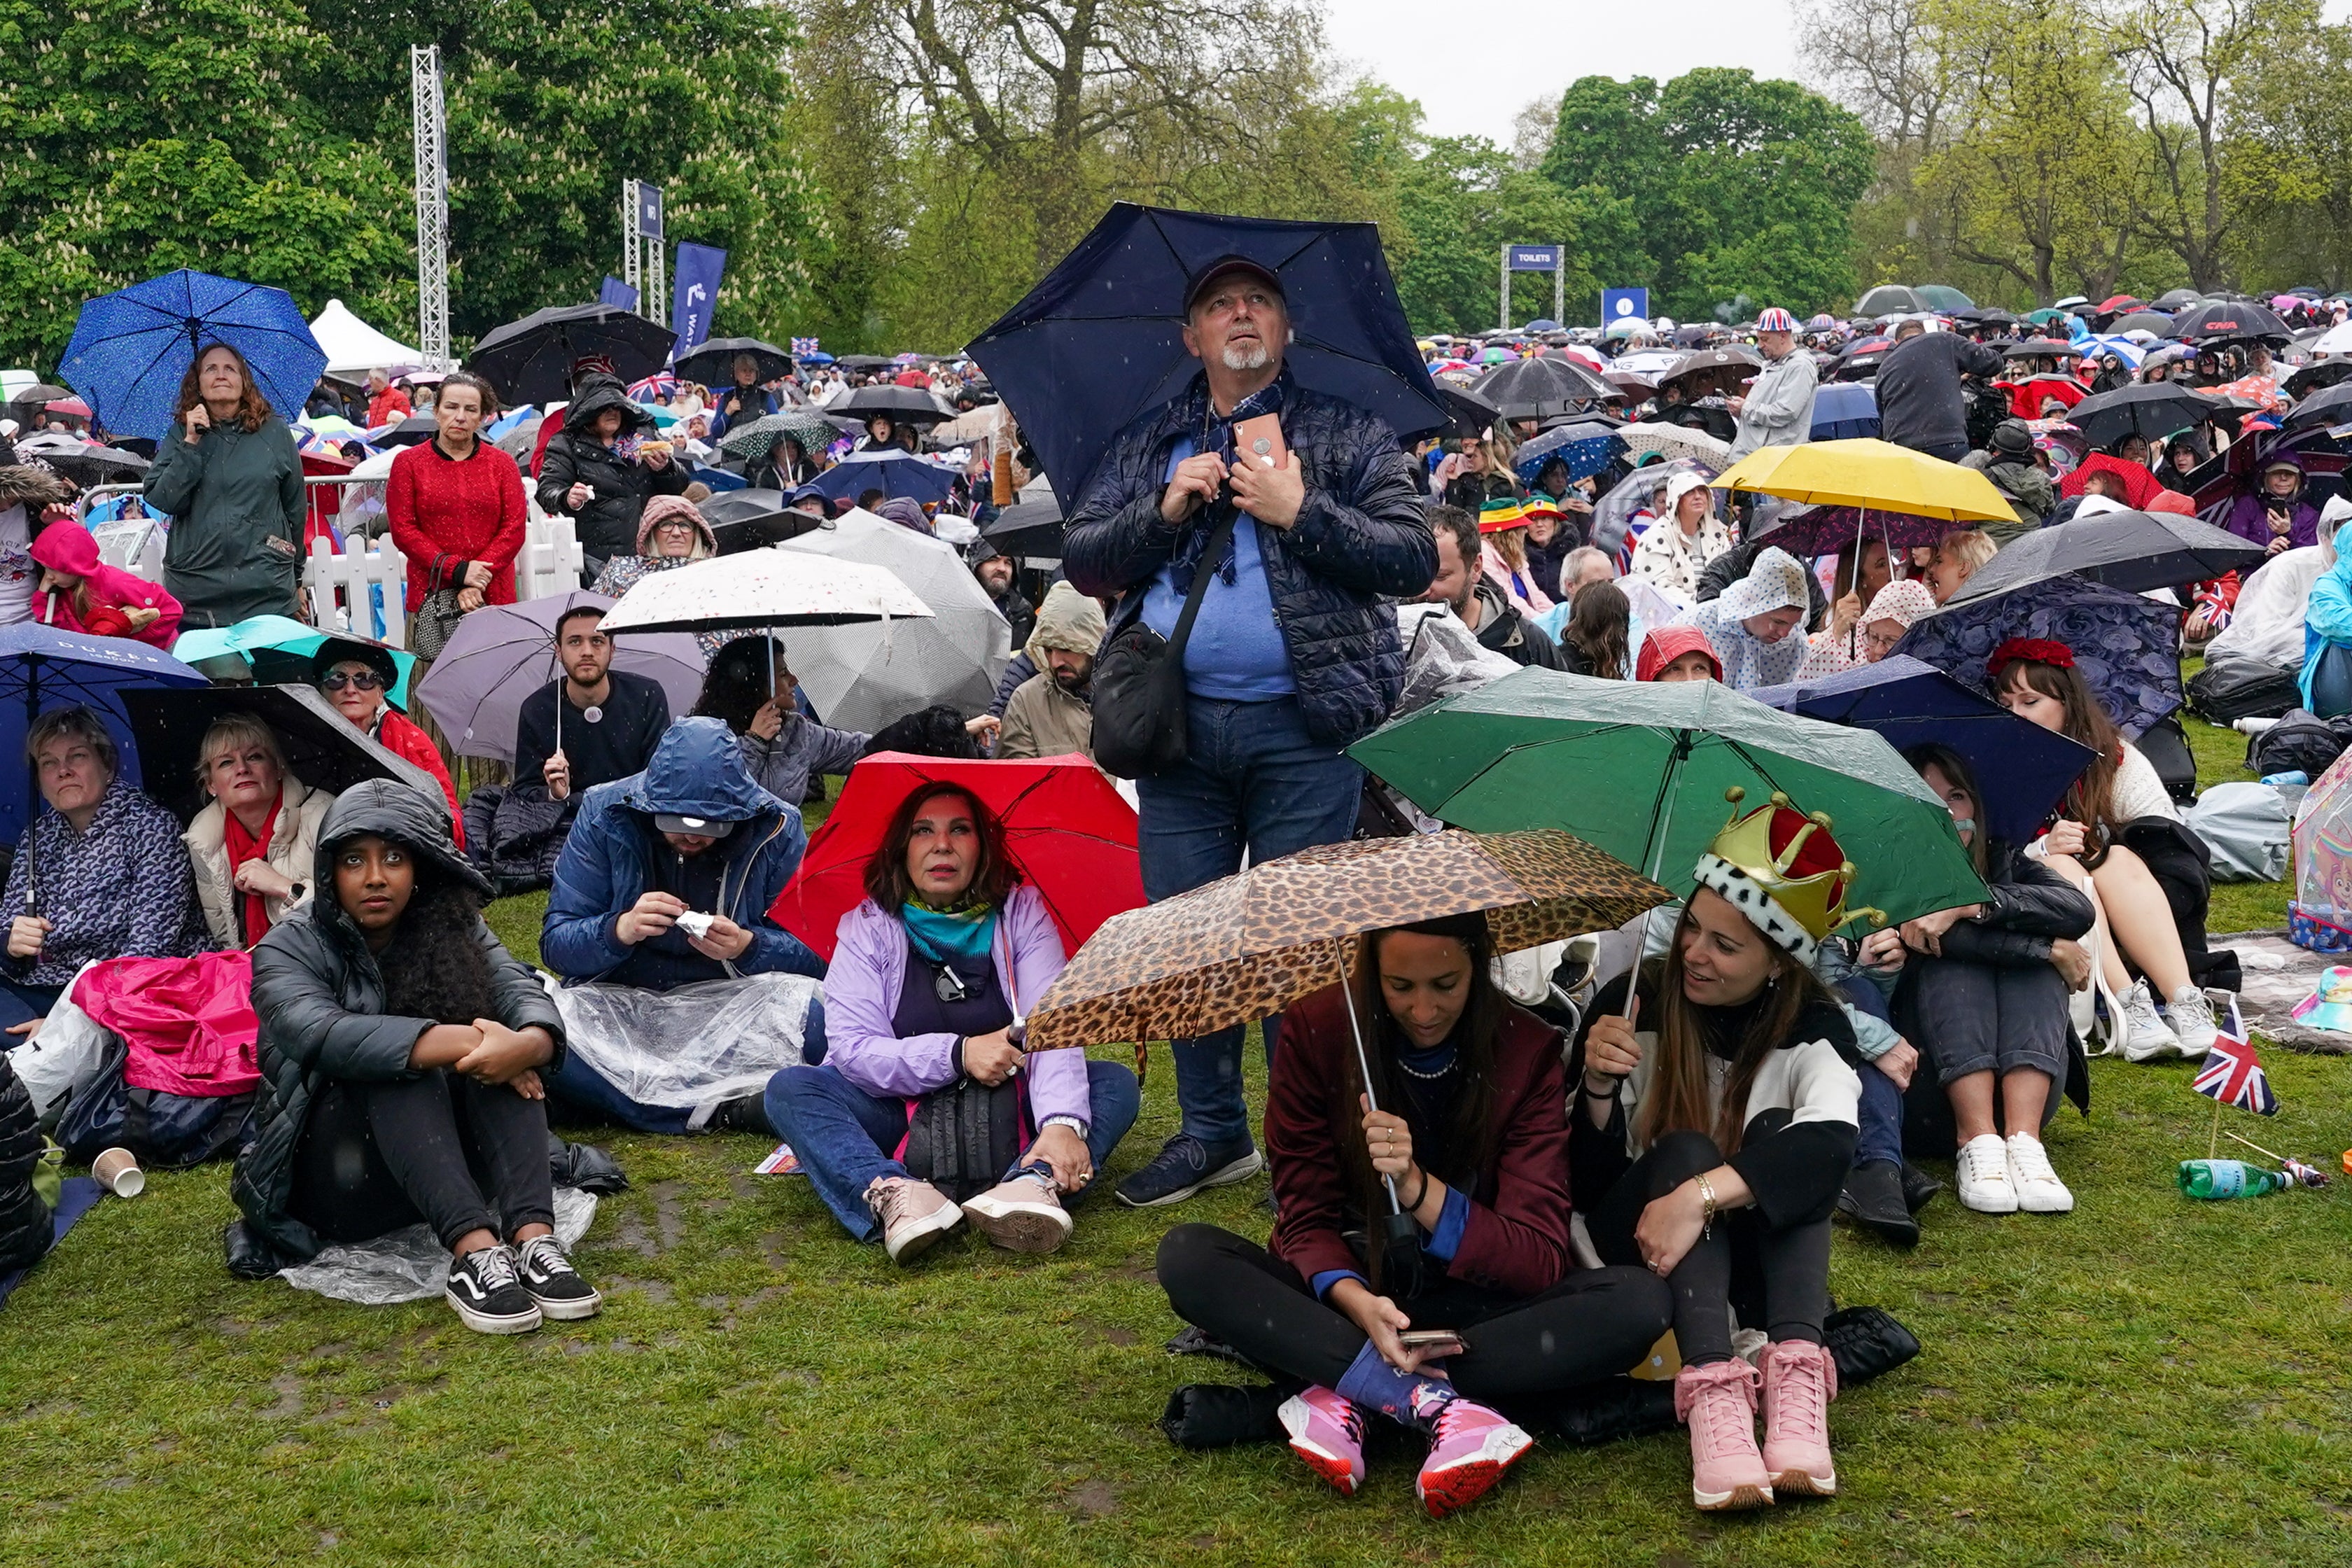 Rain soaked members of the public in Hyde Park watch giant screens showing coverage of the Coronation